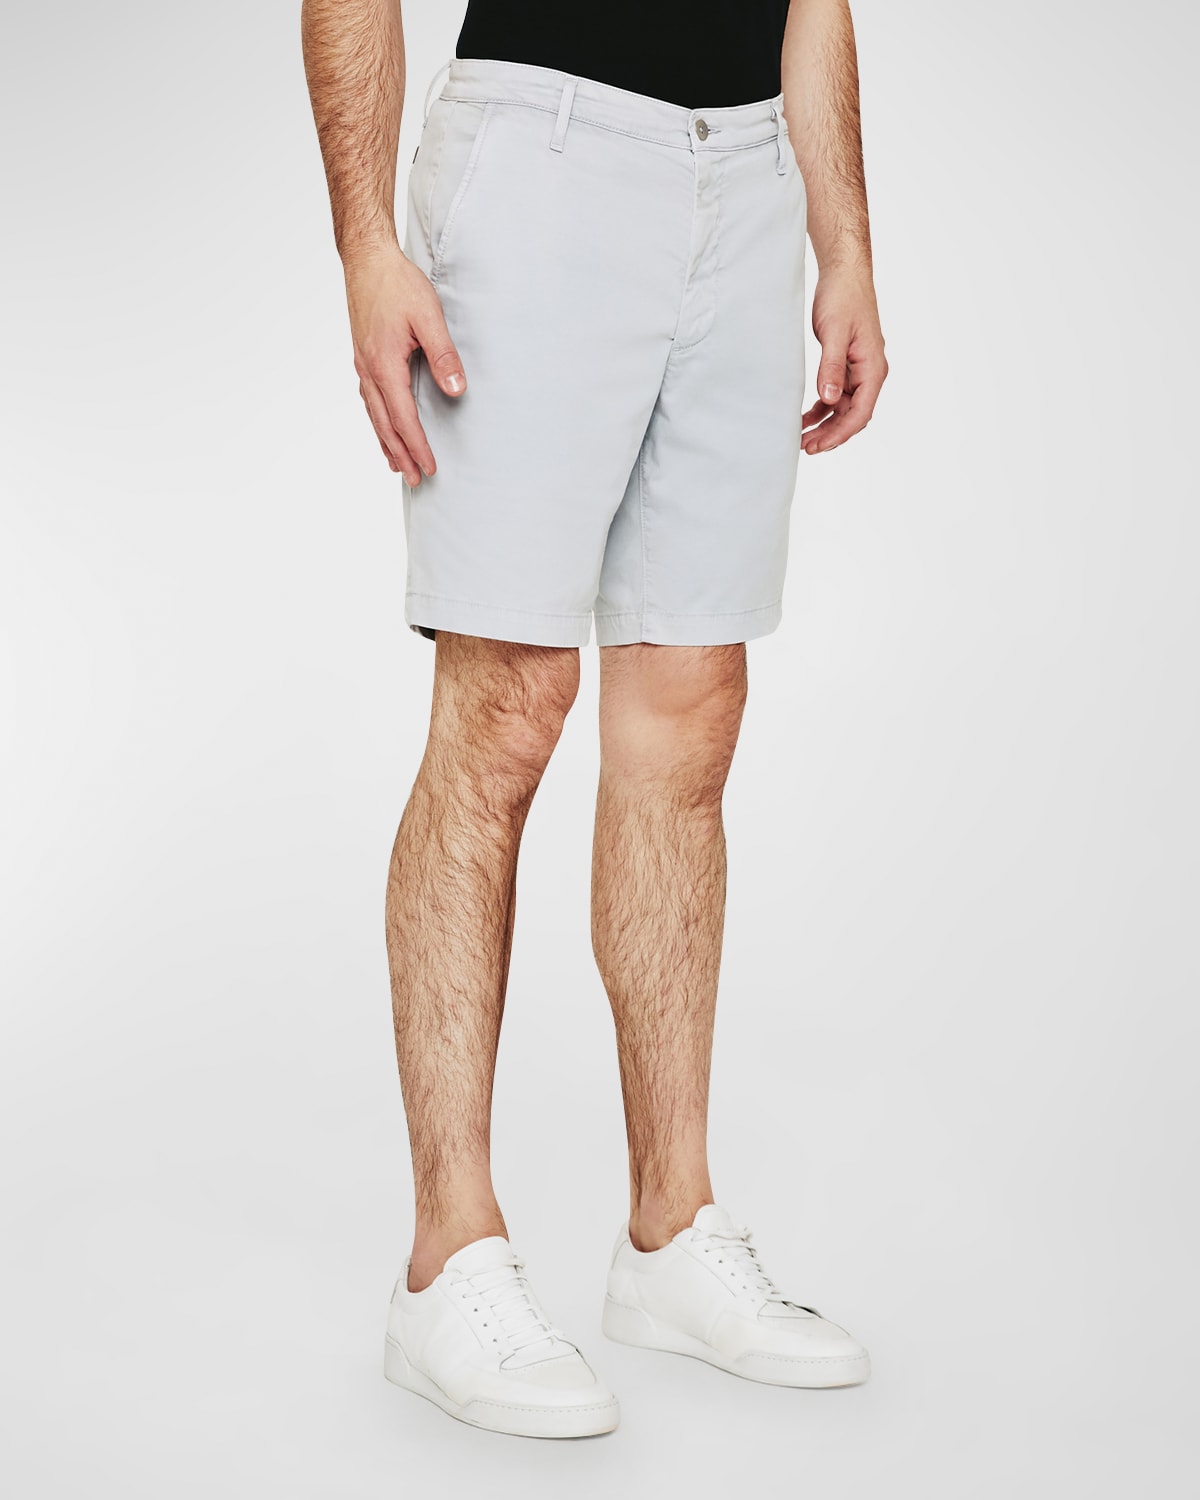 AG Adriano Goldschmied Men's Wanderer Solid Chino Shorts